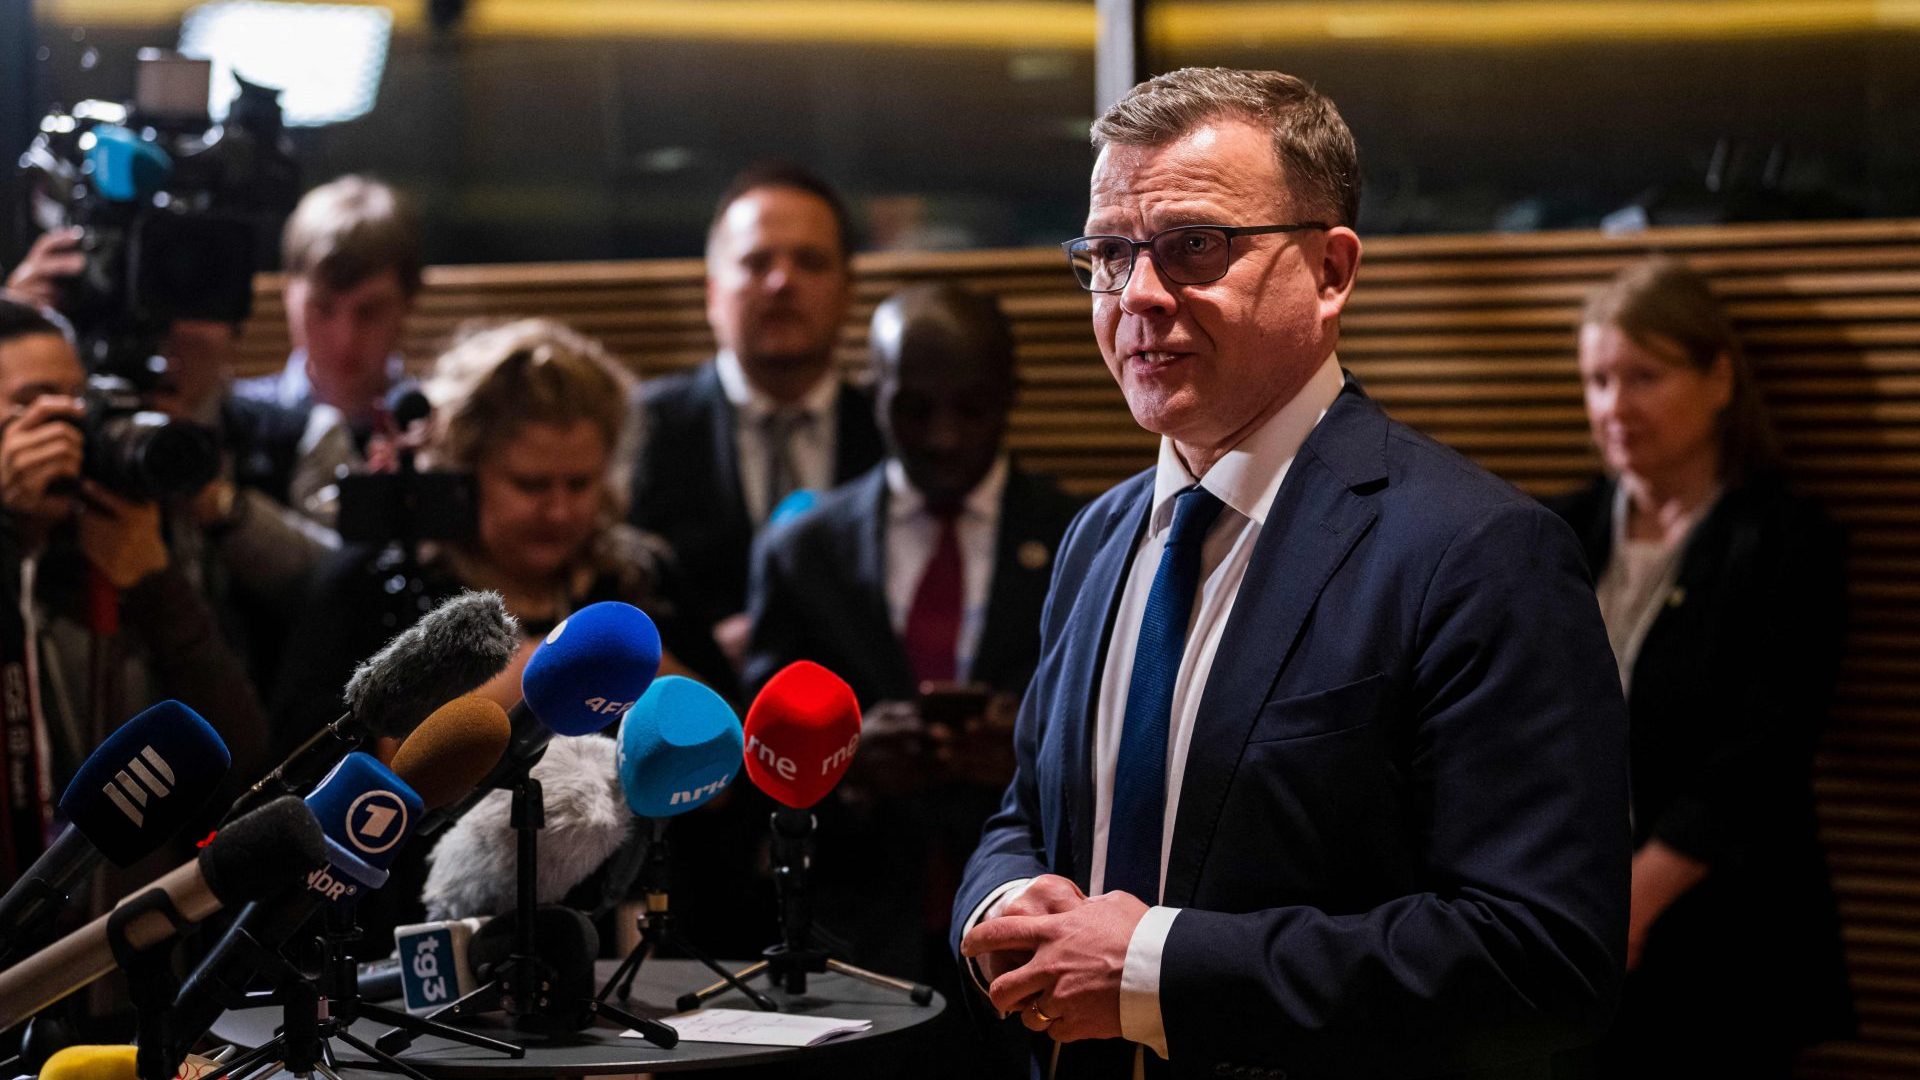 National Coalition Party chair Petteri Orpo speaks to members of the media at Pikkuparlamentti following his apparent election win (Photo by JONATHAN NACKSTRAND/AFP via Getty Images)